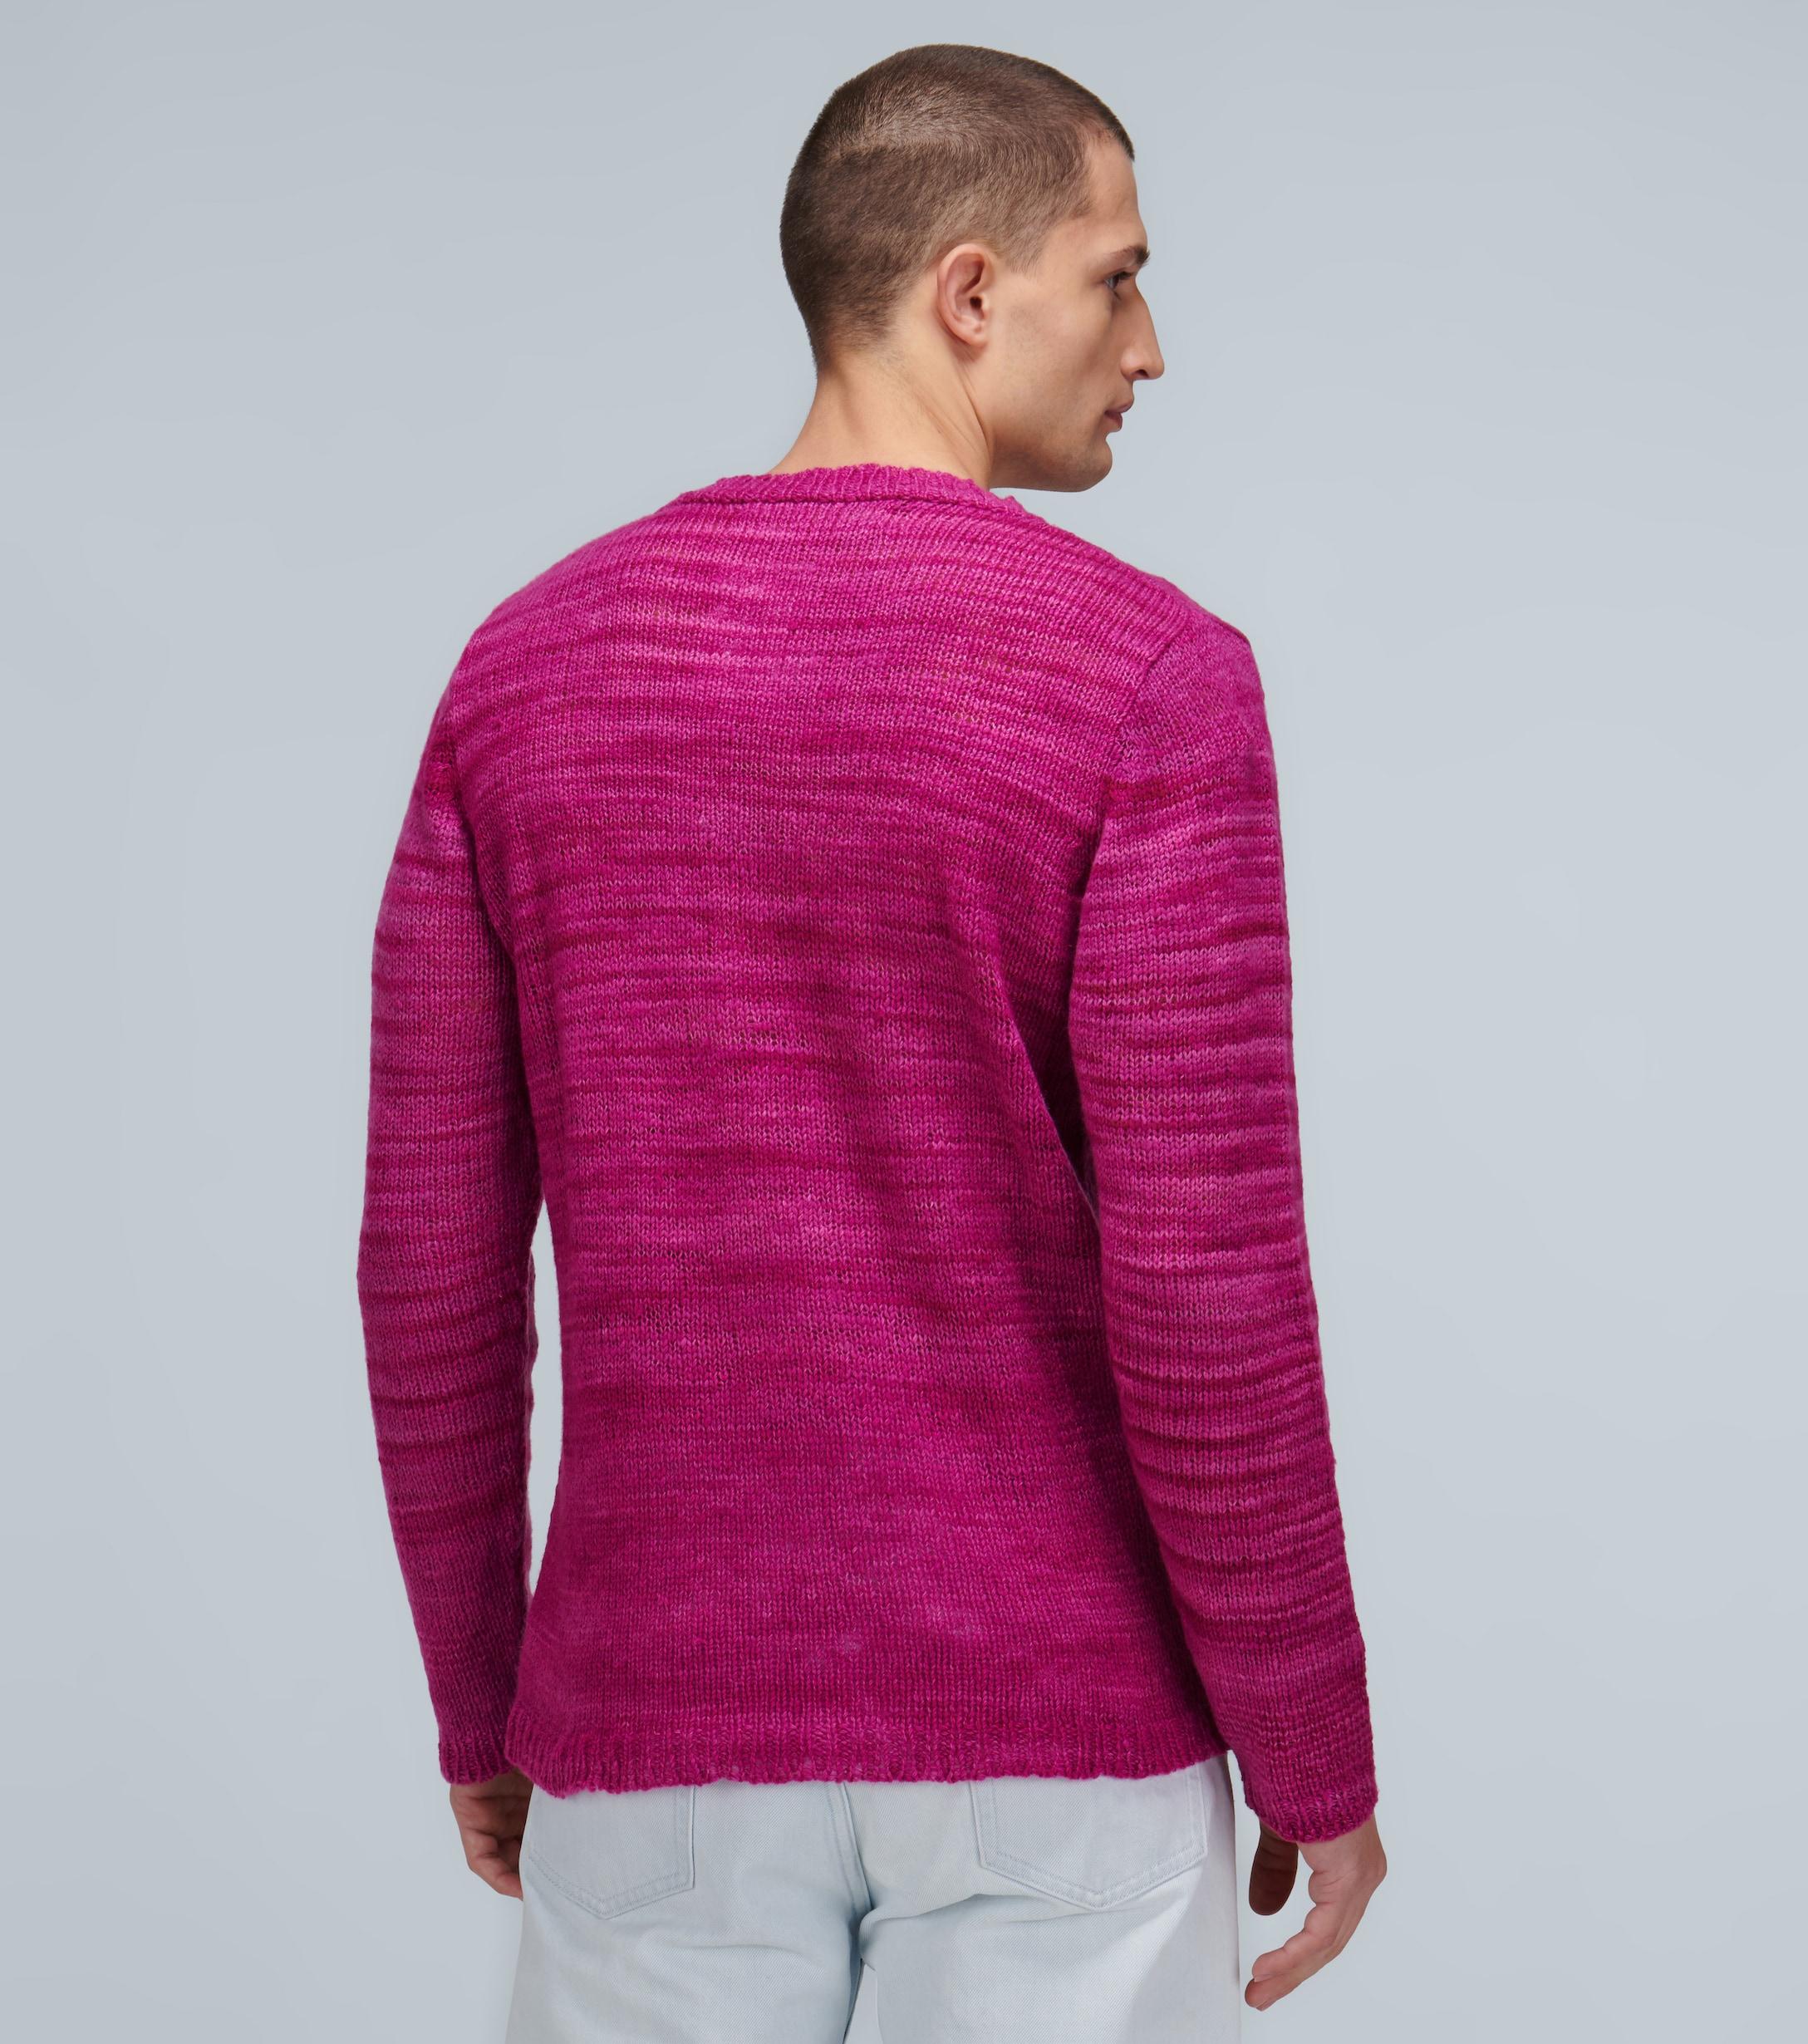 The Elder Statesman Picasso Crewneck Cashmere Sweater in Pink for Men